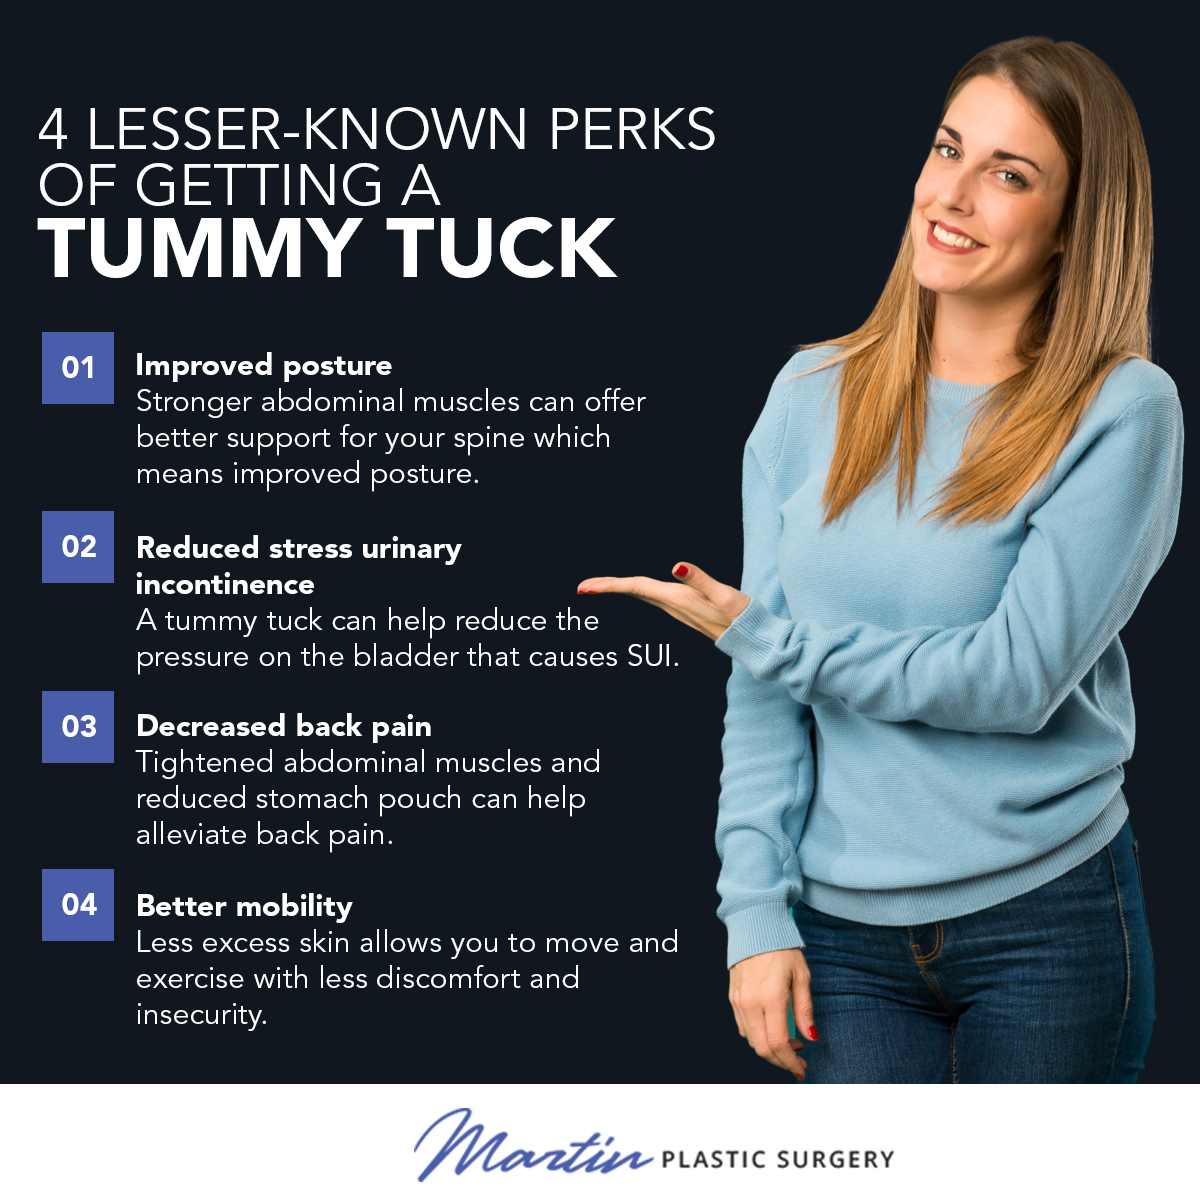 4 Lesser Known Perks of Getting a Tummy Tuck